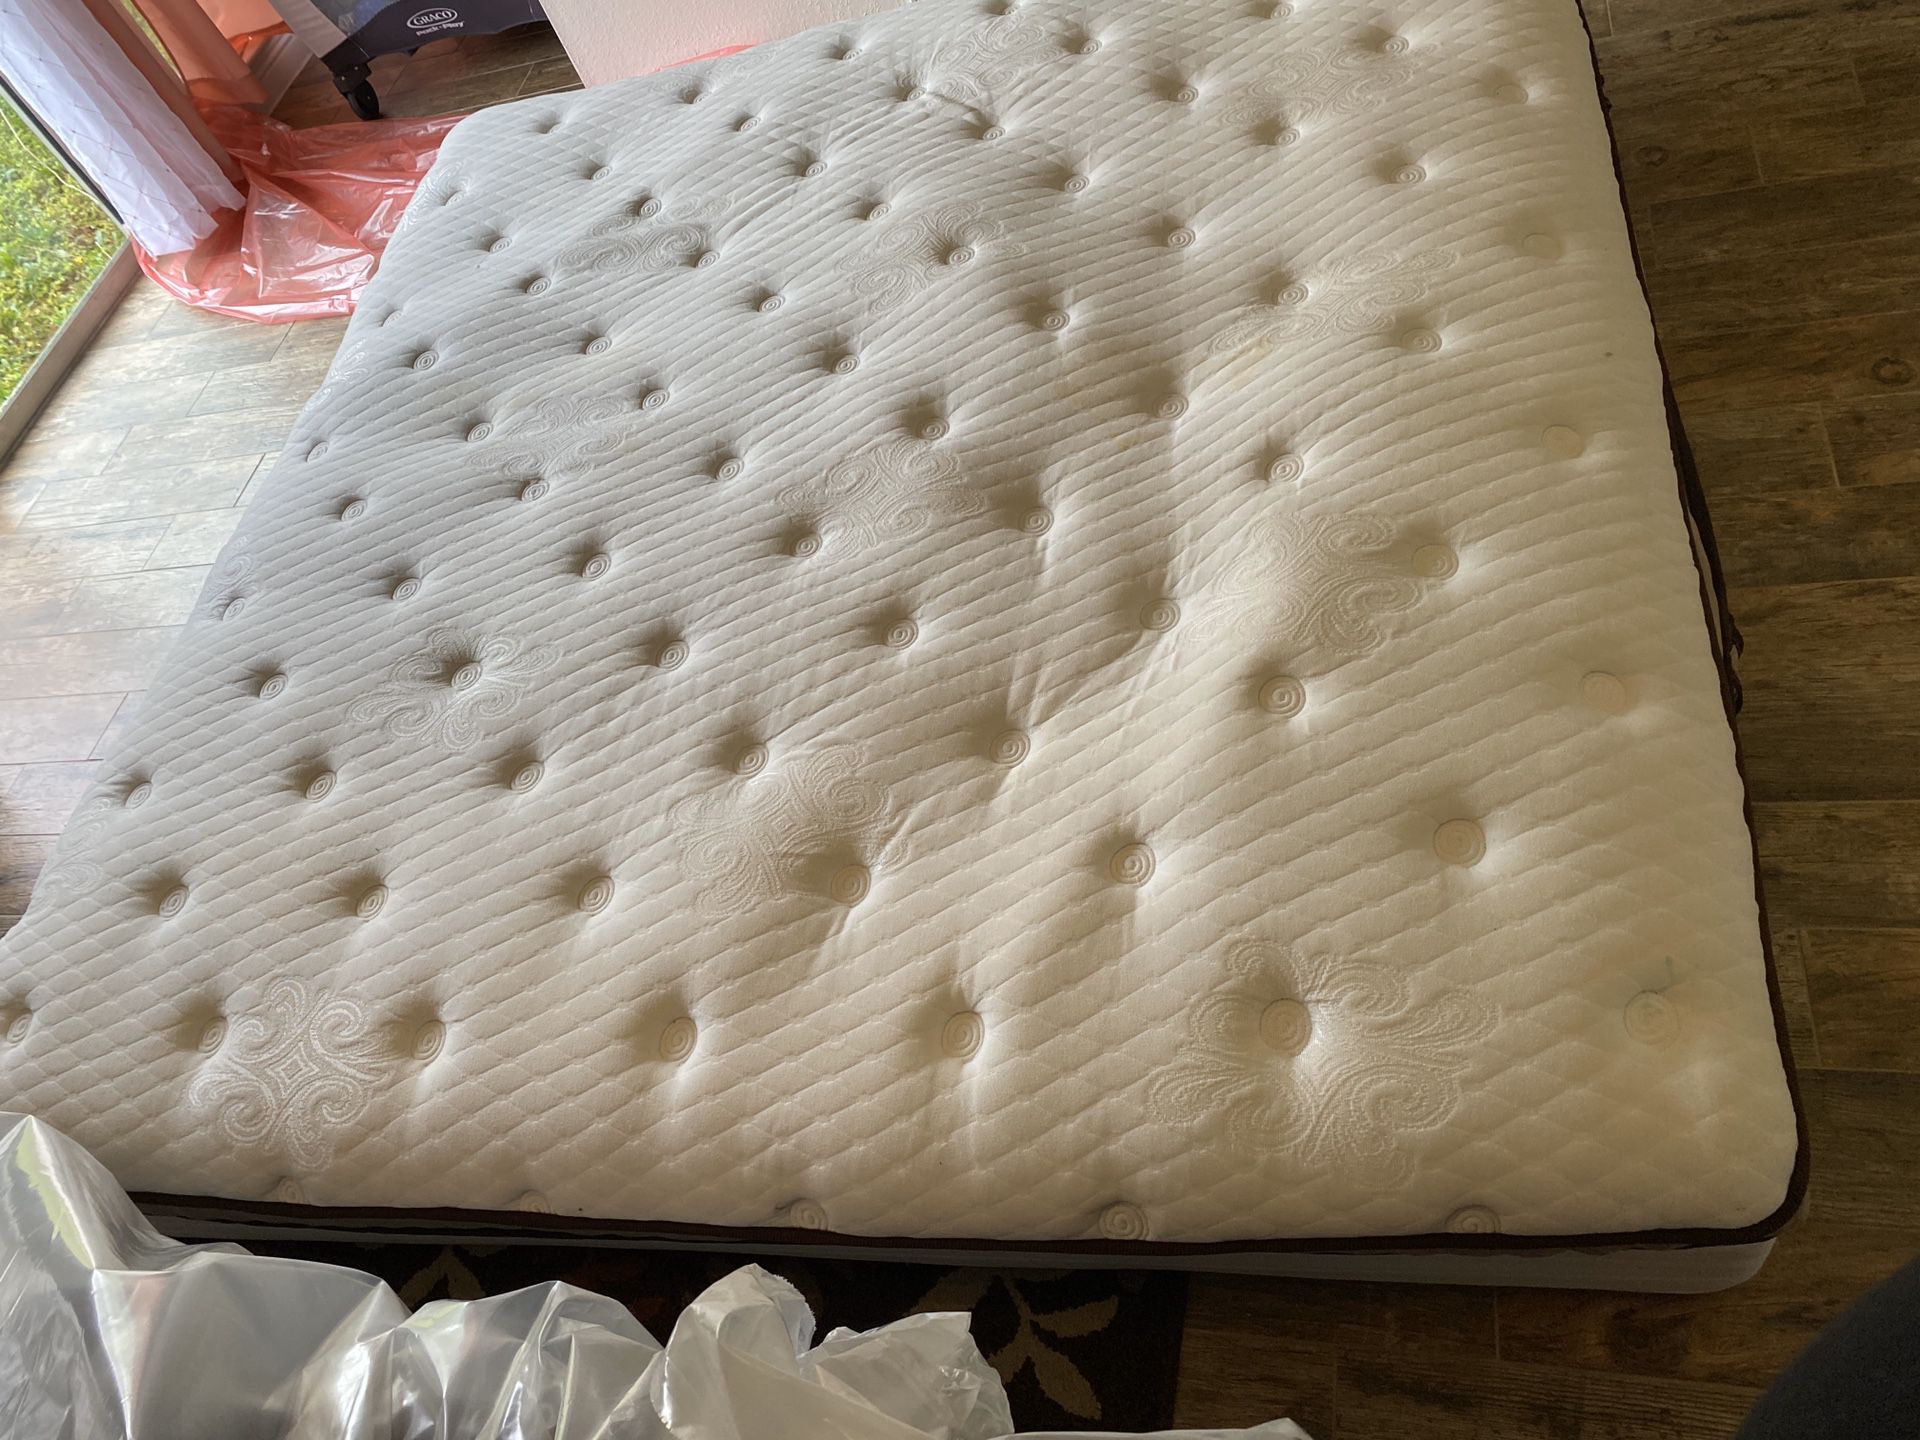 Used king mattress (free) pick up clear lake area